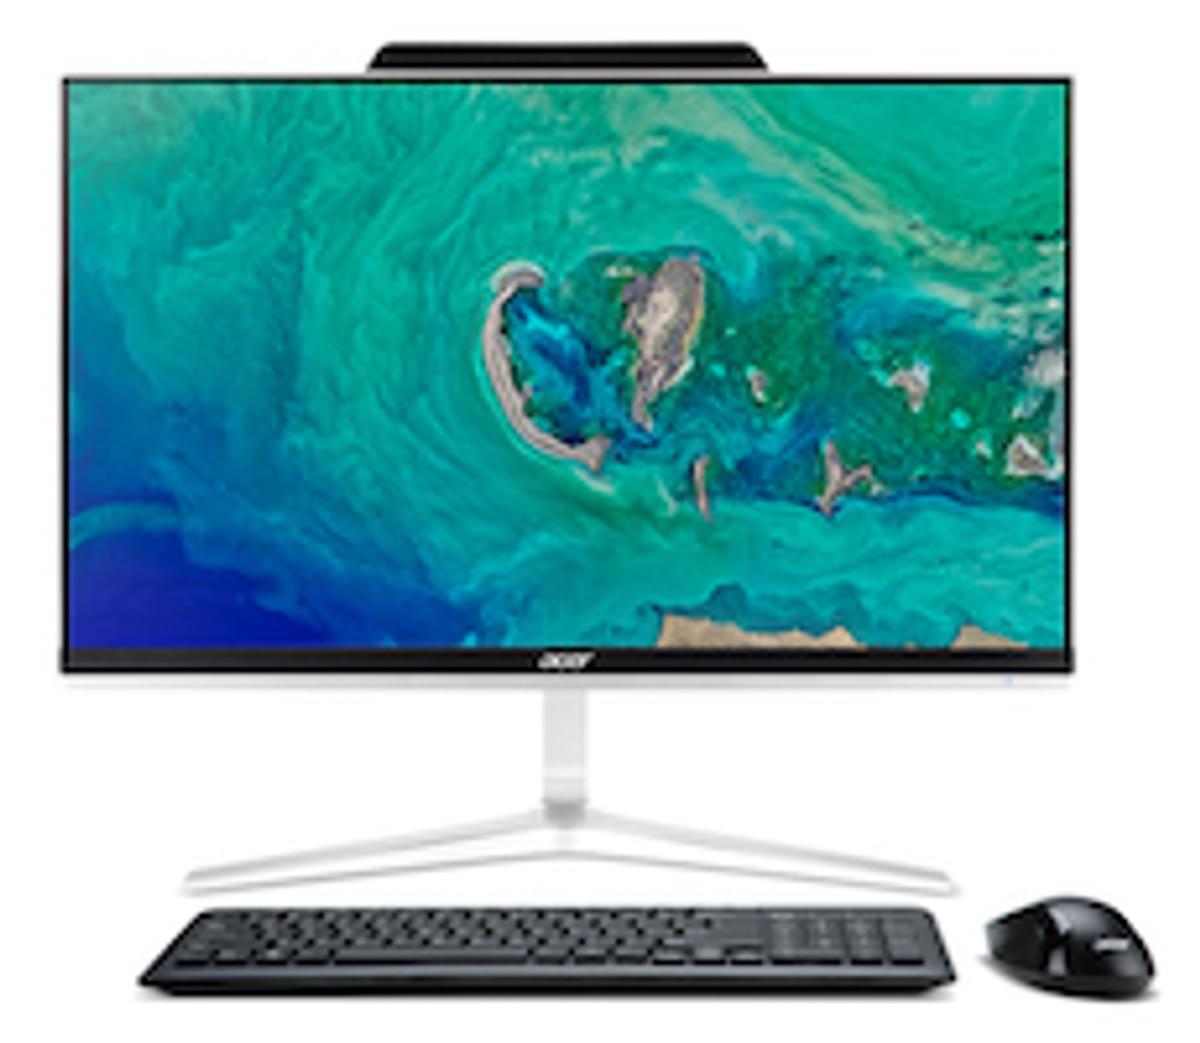 Acer vernieuwt Aspire notebooks en Aspire Z 24 all-in-one pc image